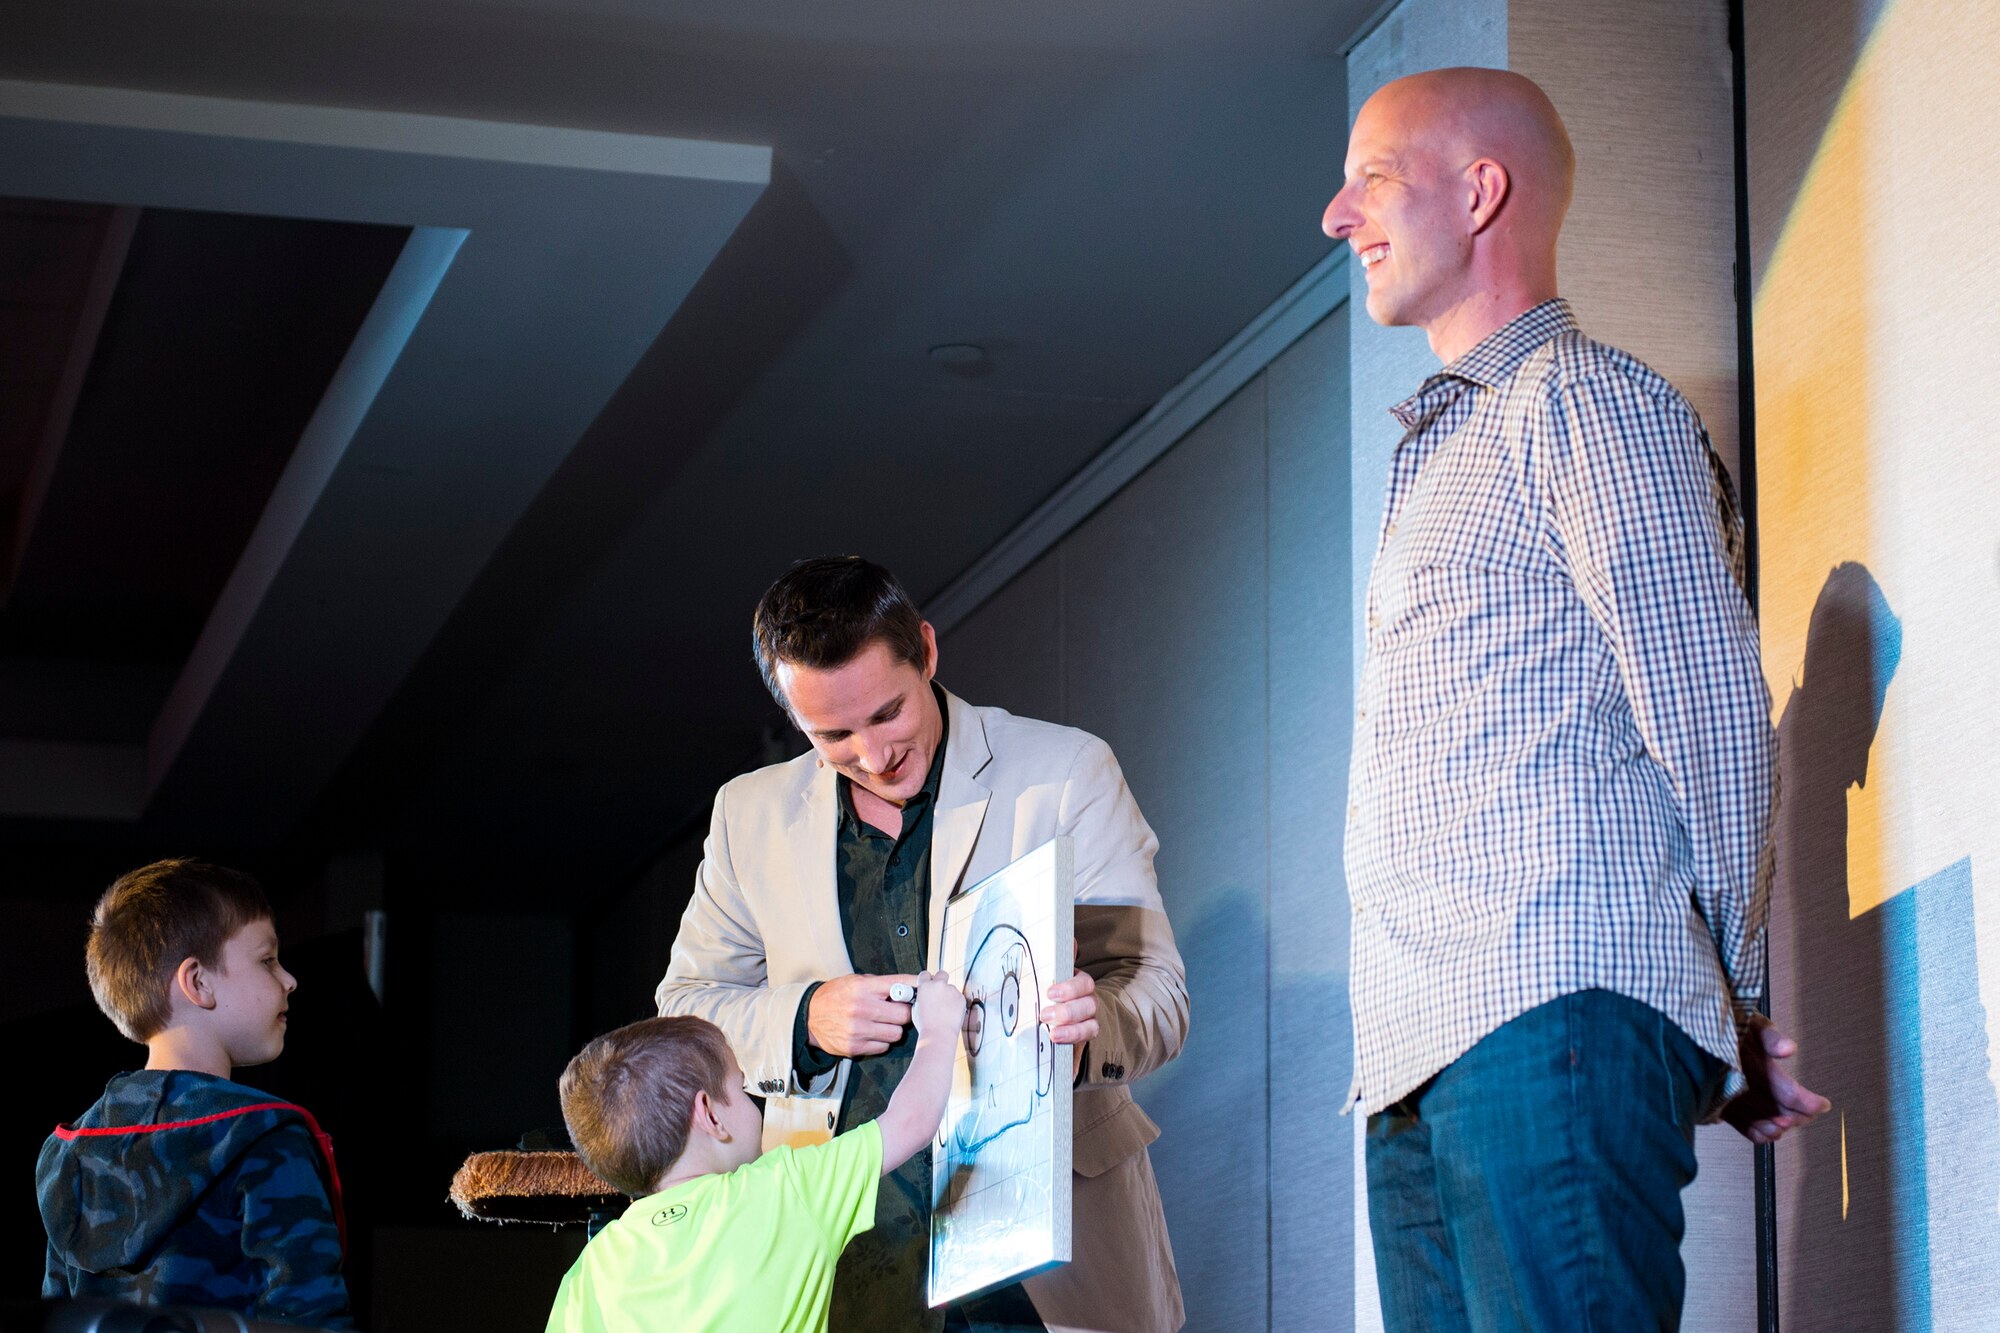 Ryan Bomgardner, ventriloquist, performs a skit with ‘Hanz the Drawing Board’ while involving audience members during his comedy show, March 15, 2018, at Moody Air Force Base, Ga. Air Force Entertainment provided this opportunity for Airmen to attend as a family to enjoy some time away from the mission. Bomgardner is a full-time ventriloquist and comedian who performs over 140 shows annually throughout North America. (U.S. Air Force photo by Airman 1st Class Erick Requadt)